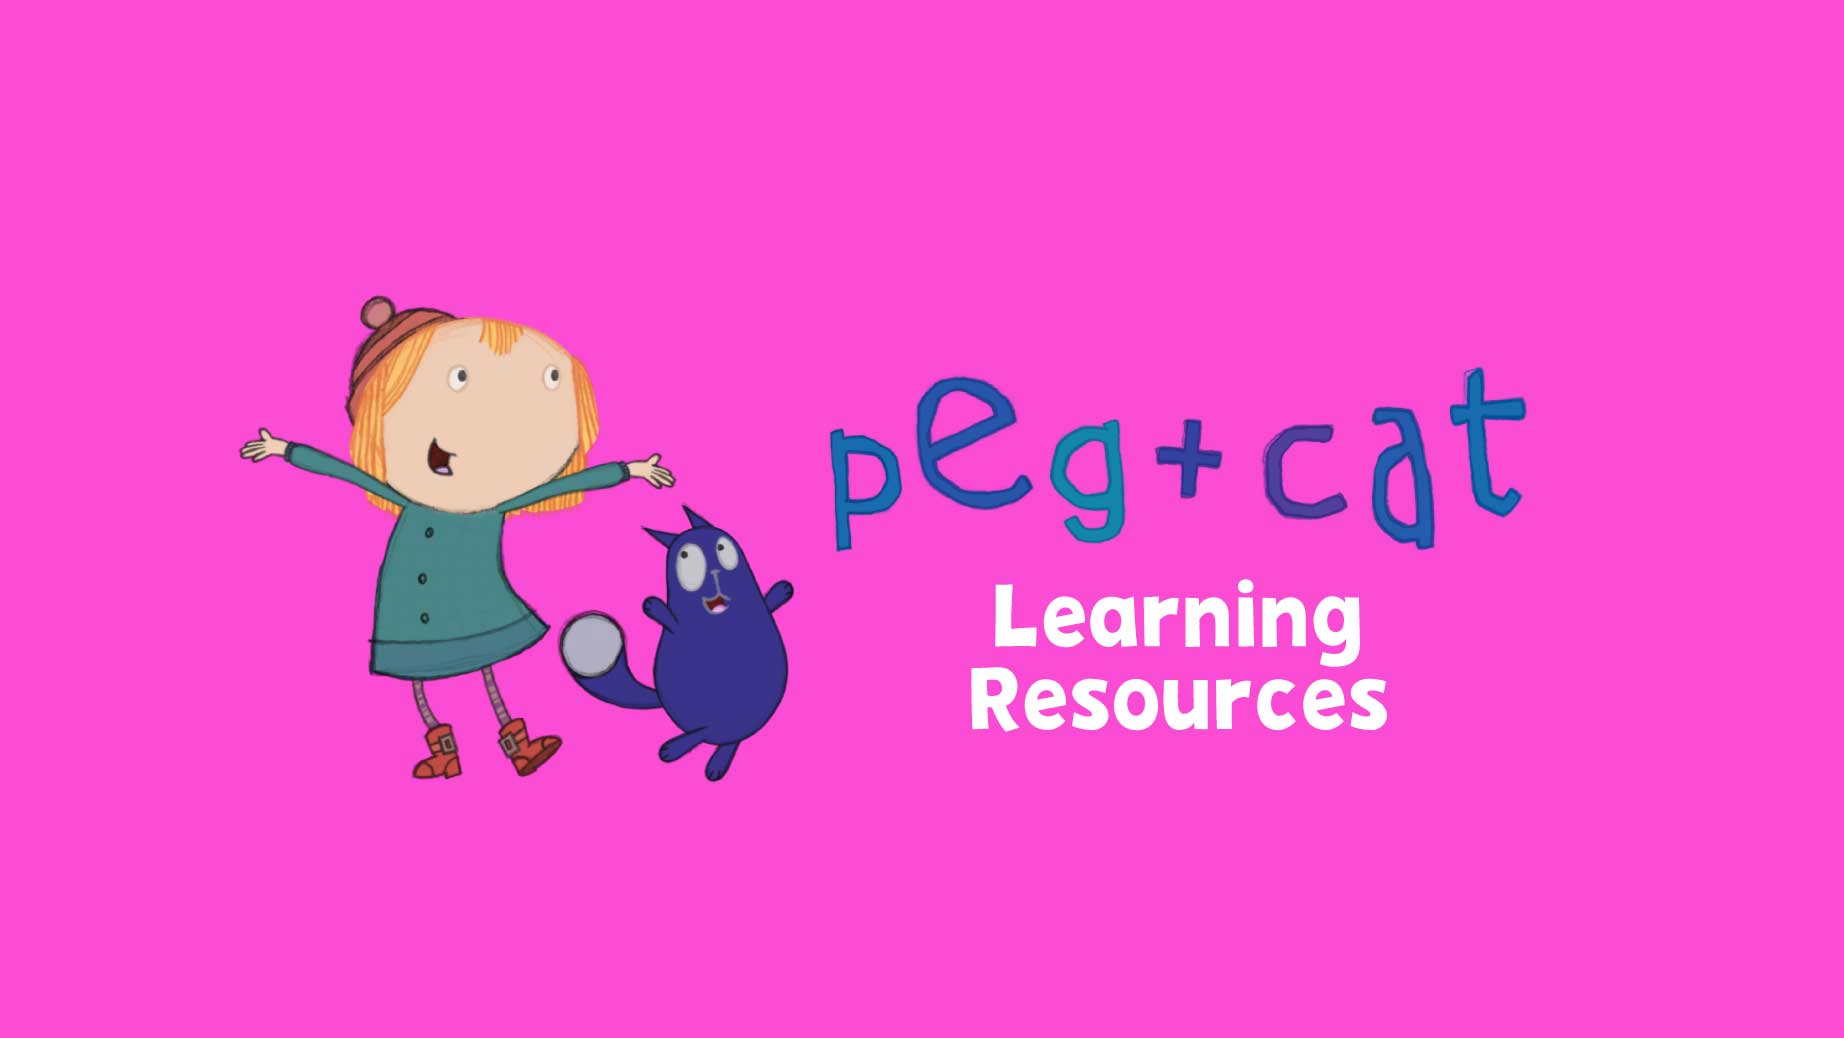 peg + cat Learning Resources